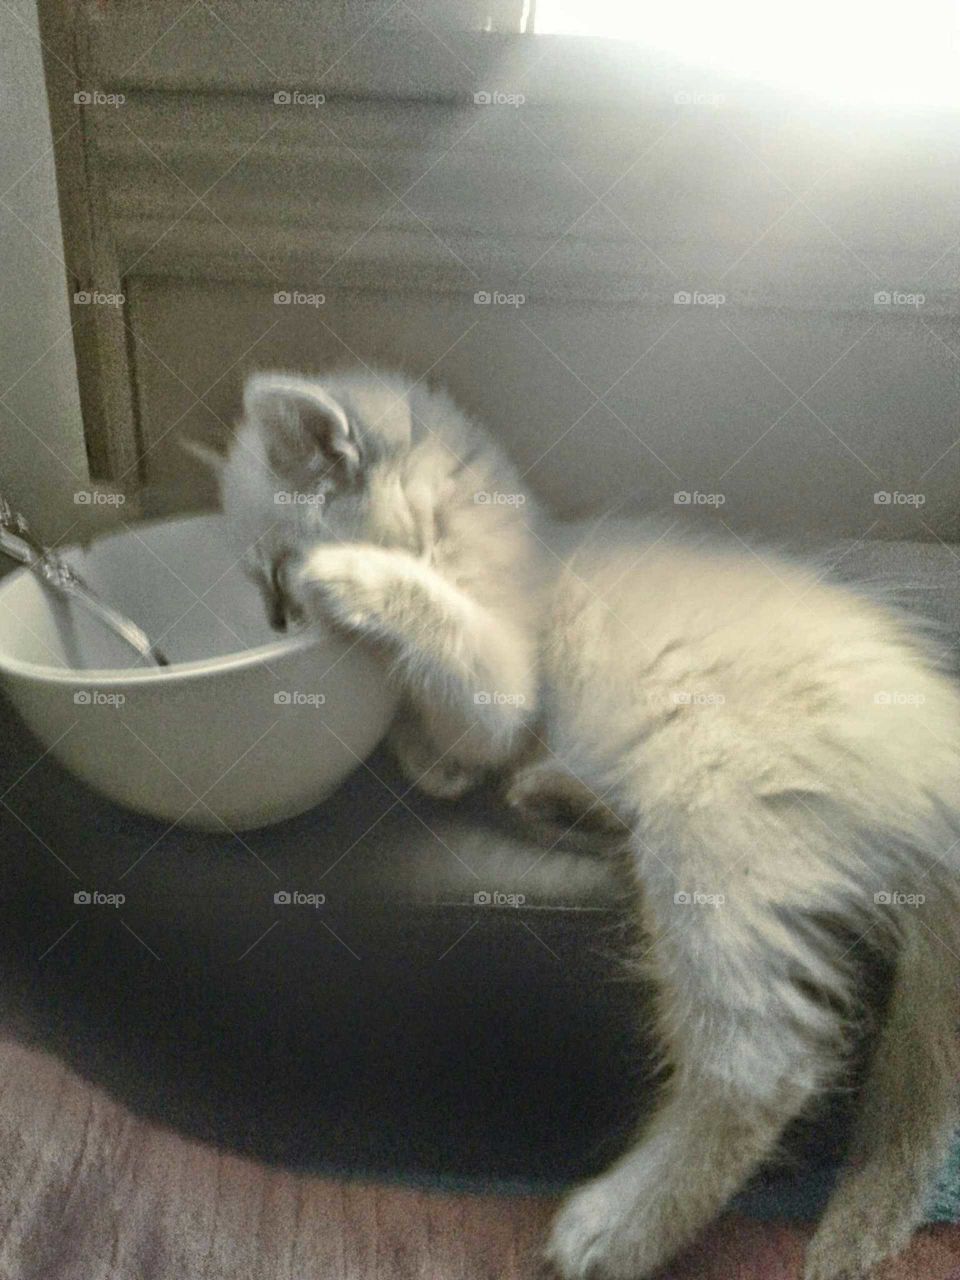 When you give a kitten some milk